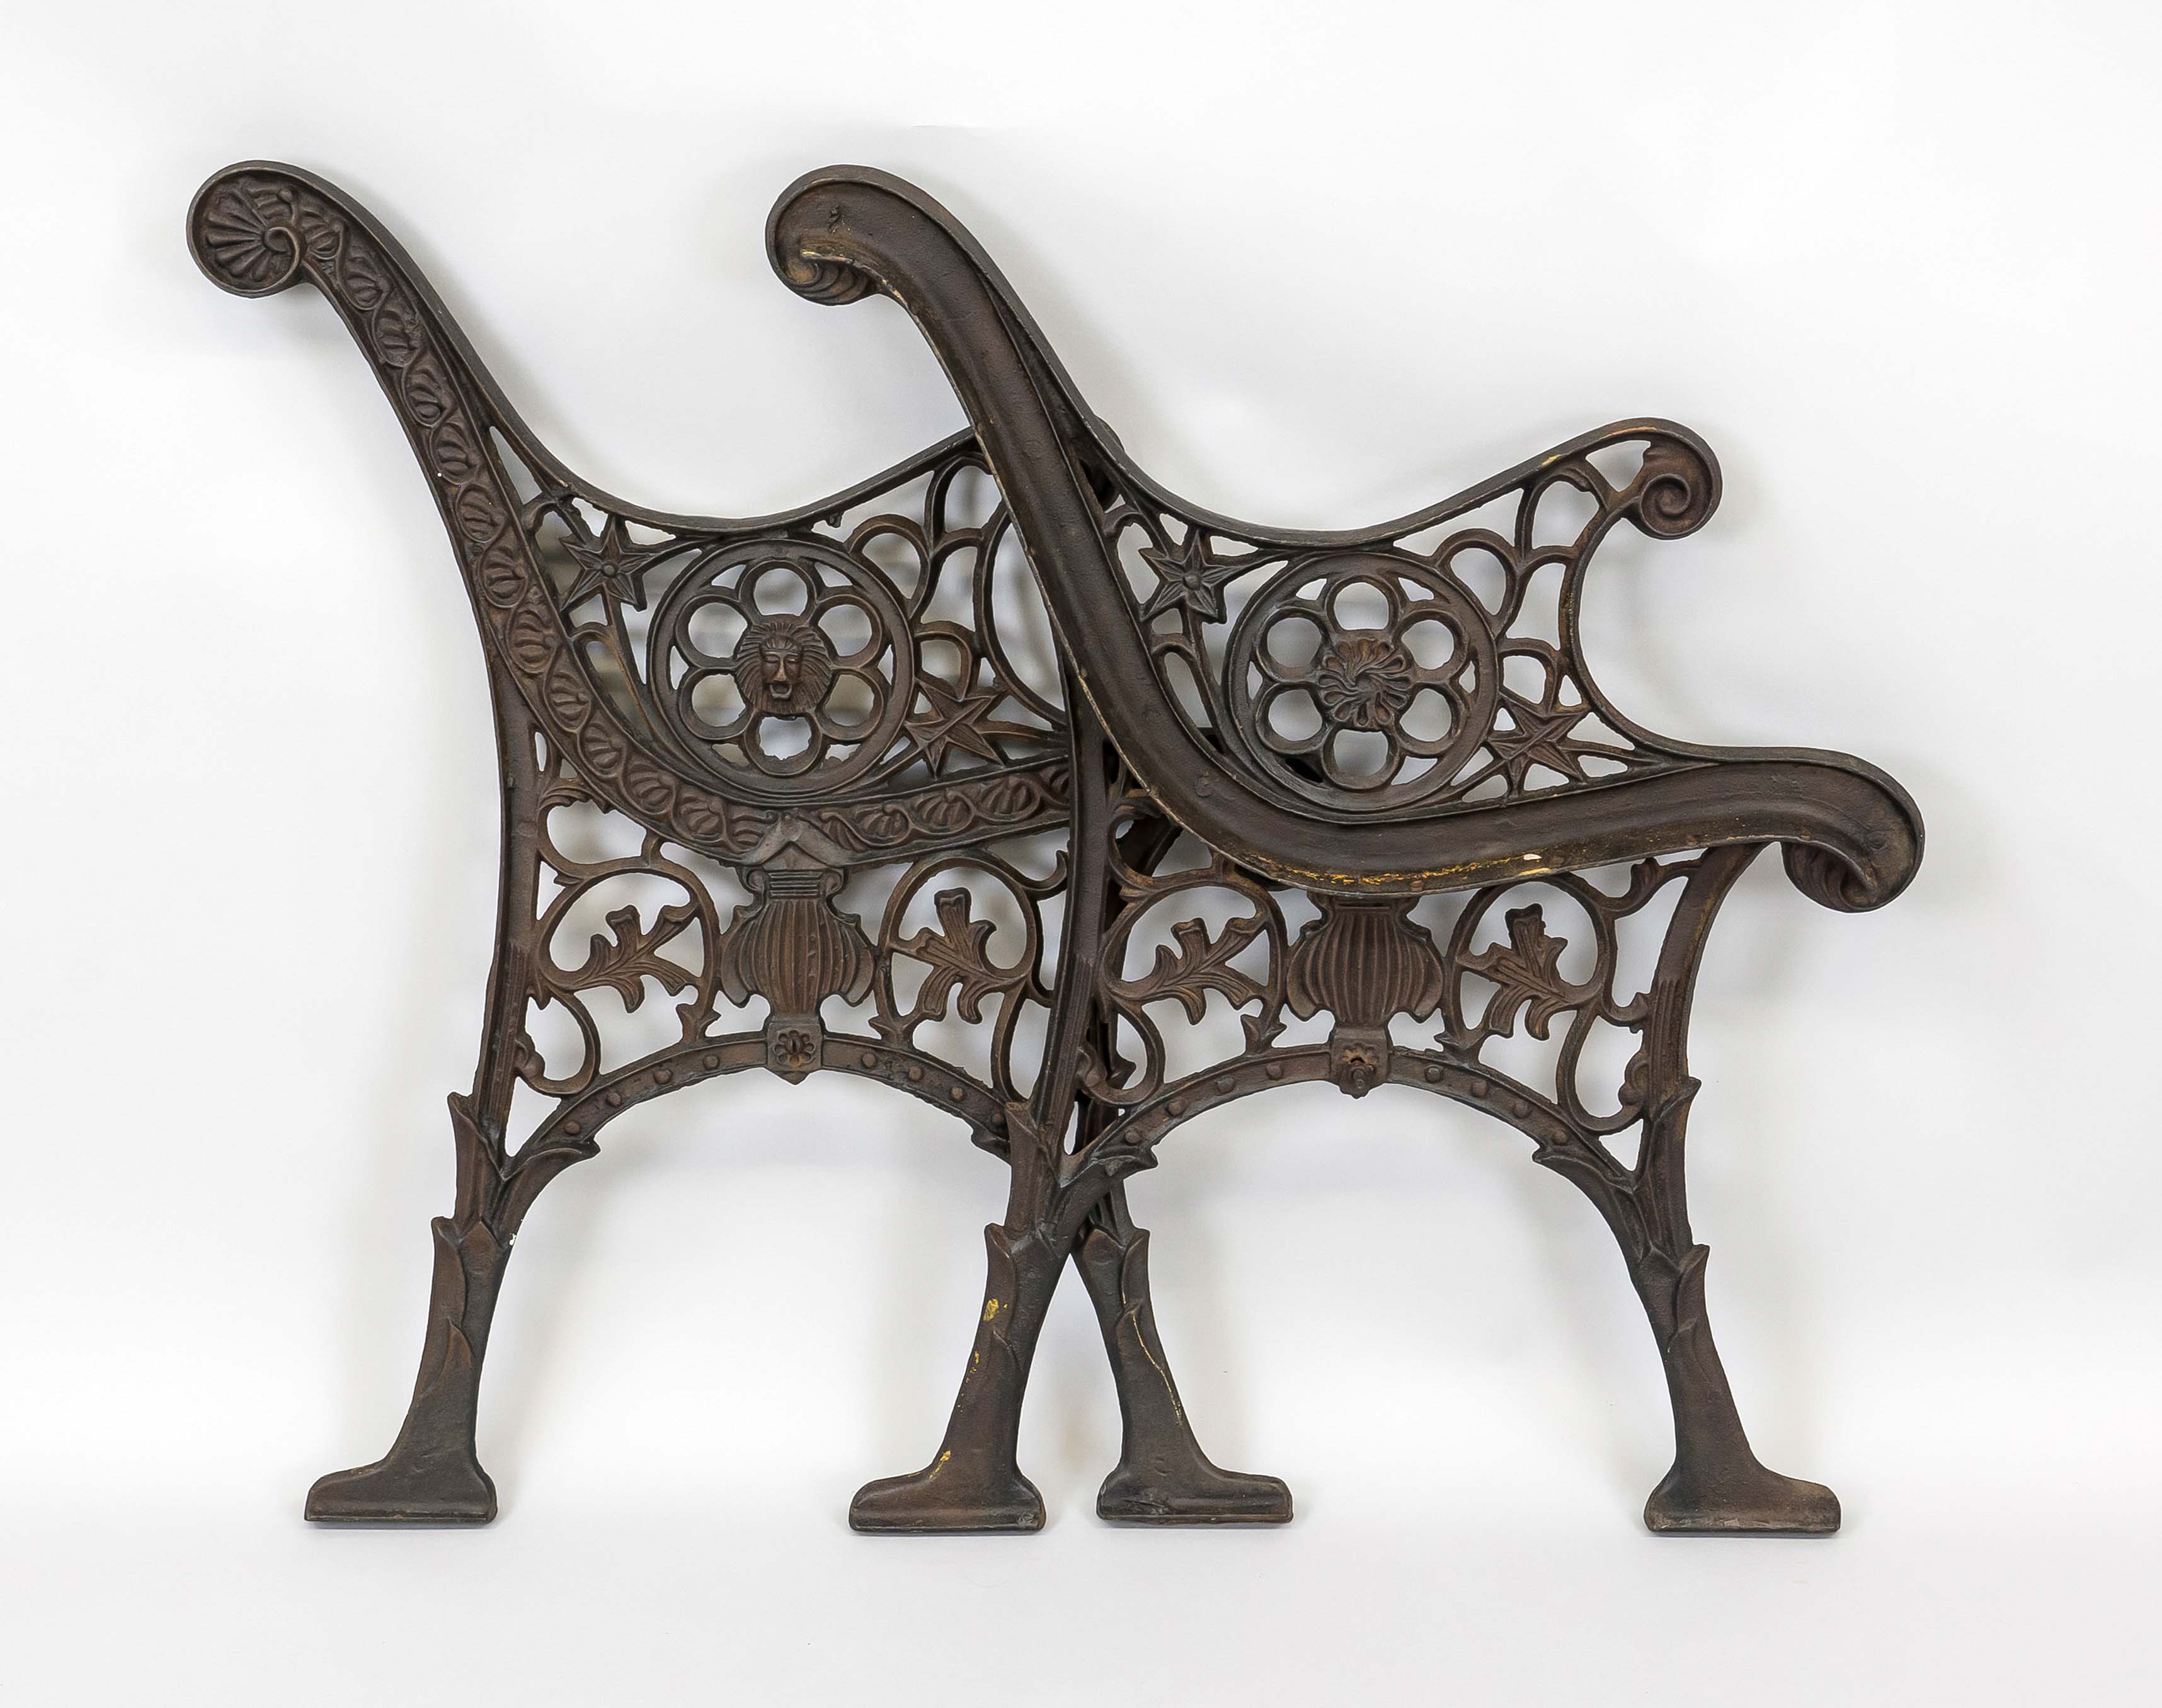 Frame for a garden bench, 20th century, cast iron, painted black, cheeks ornamentally pierced with